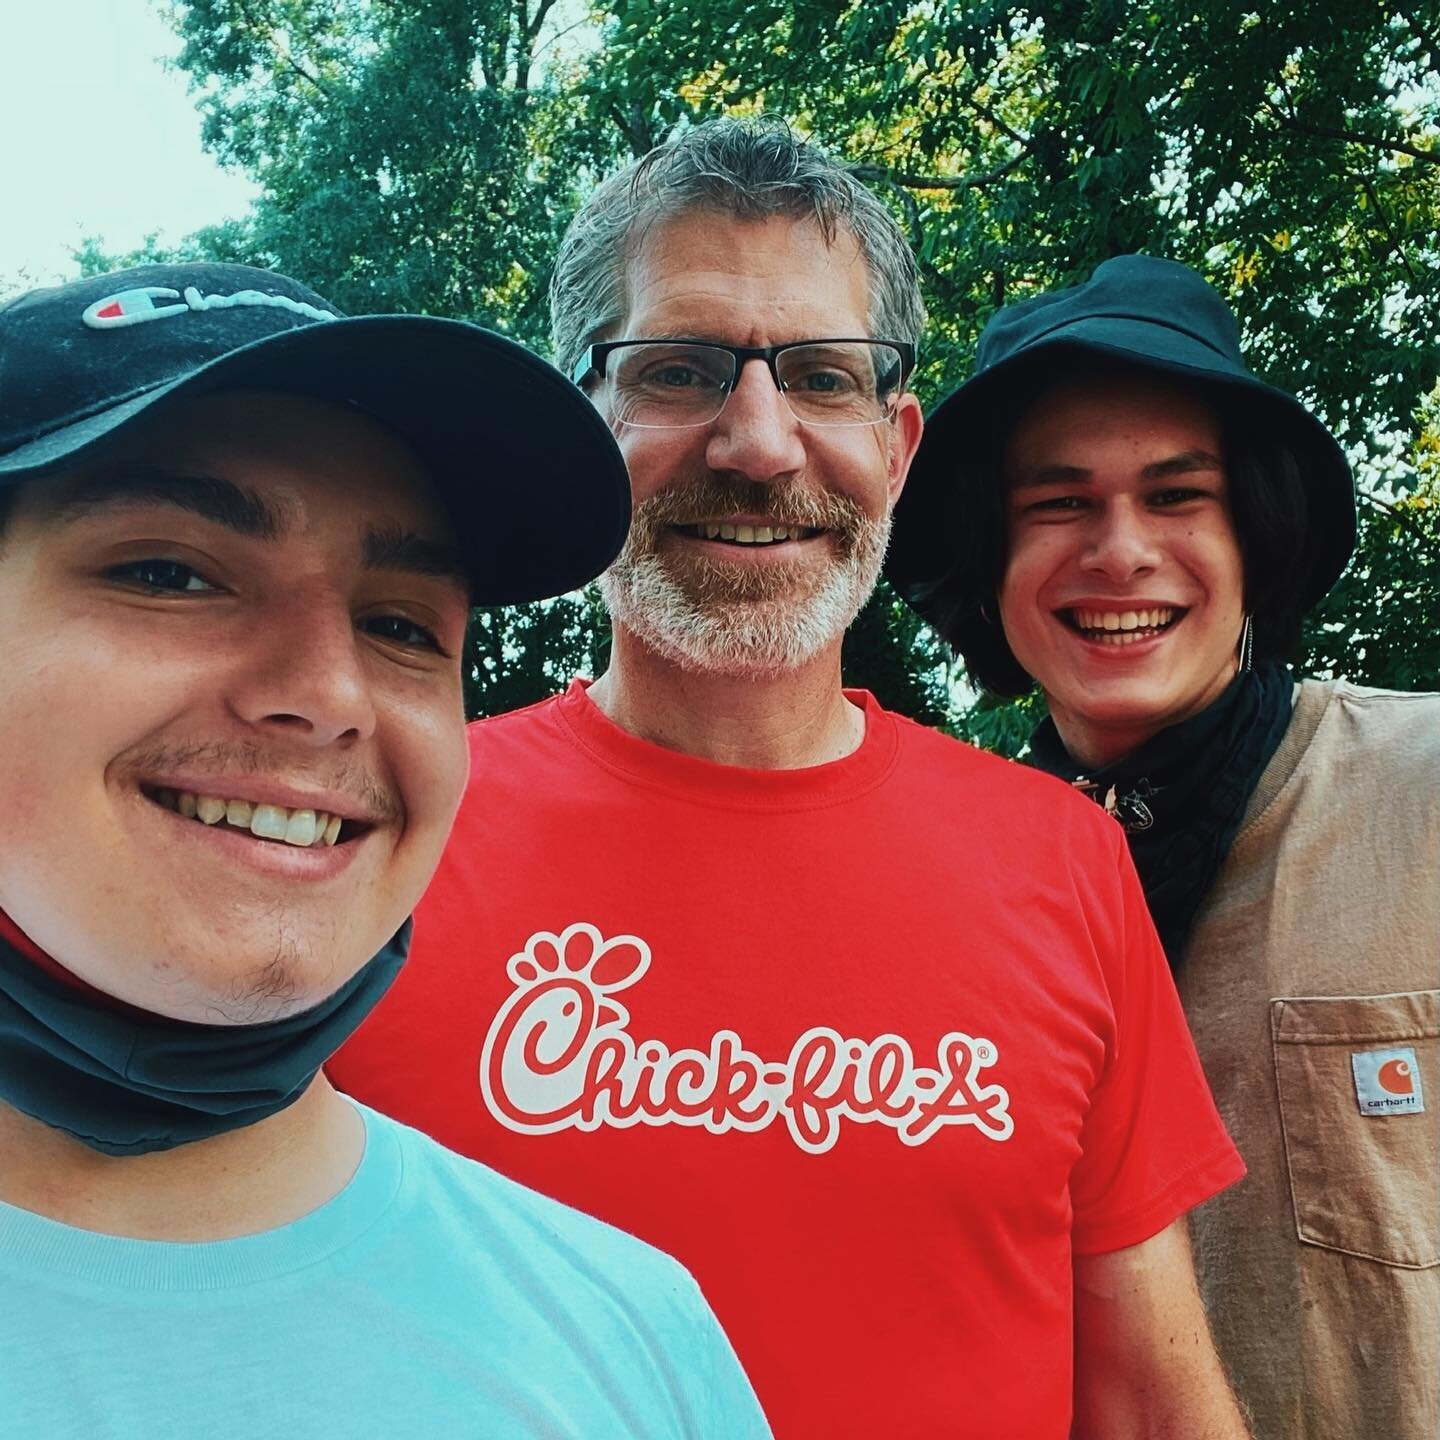 We believe every person has a story and some aren&rsquo;t always easy. That&rsquo;s why we&rsquo;ve got to be better together. We got the opportunity to serve a friend of the Fredericksburg community by taking care of a little yard work...it&rsquo;s 